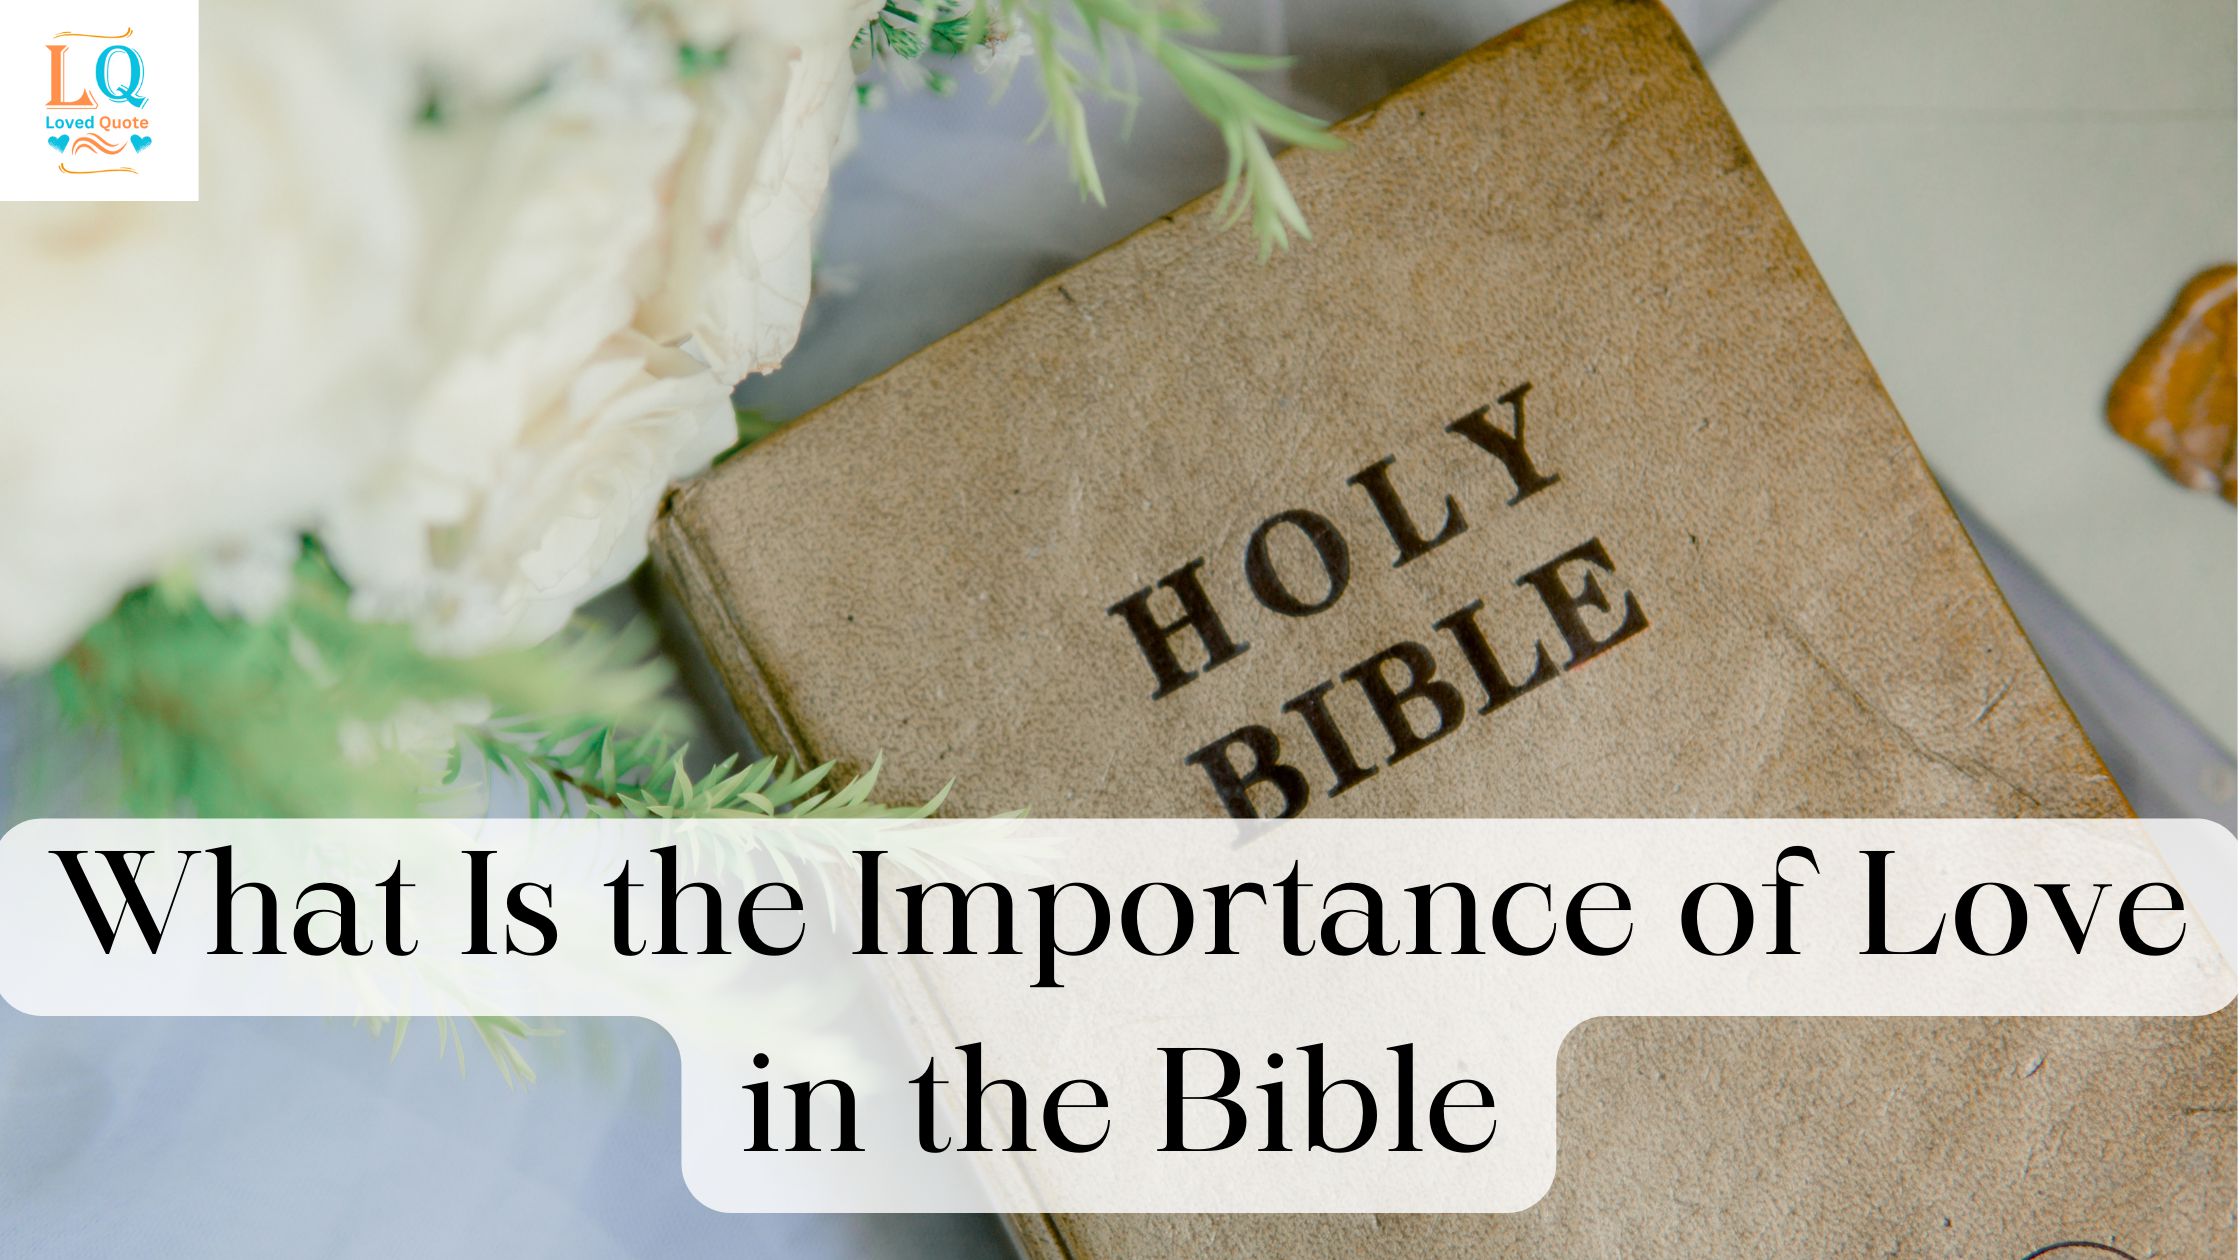 What Is the Importance of Love in the Bible